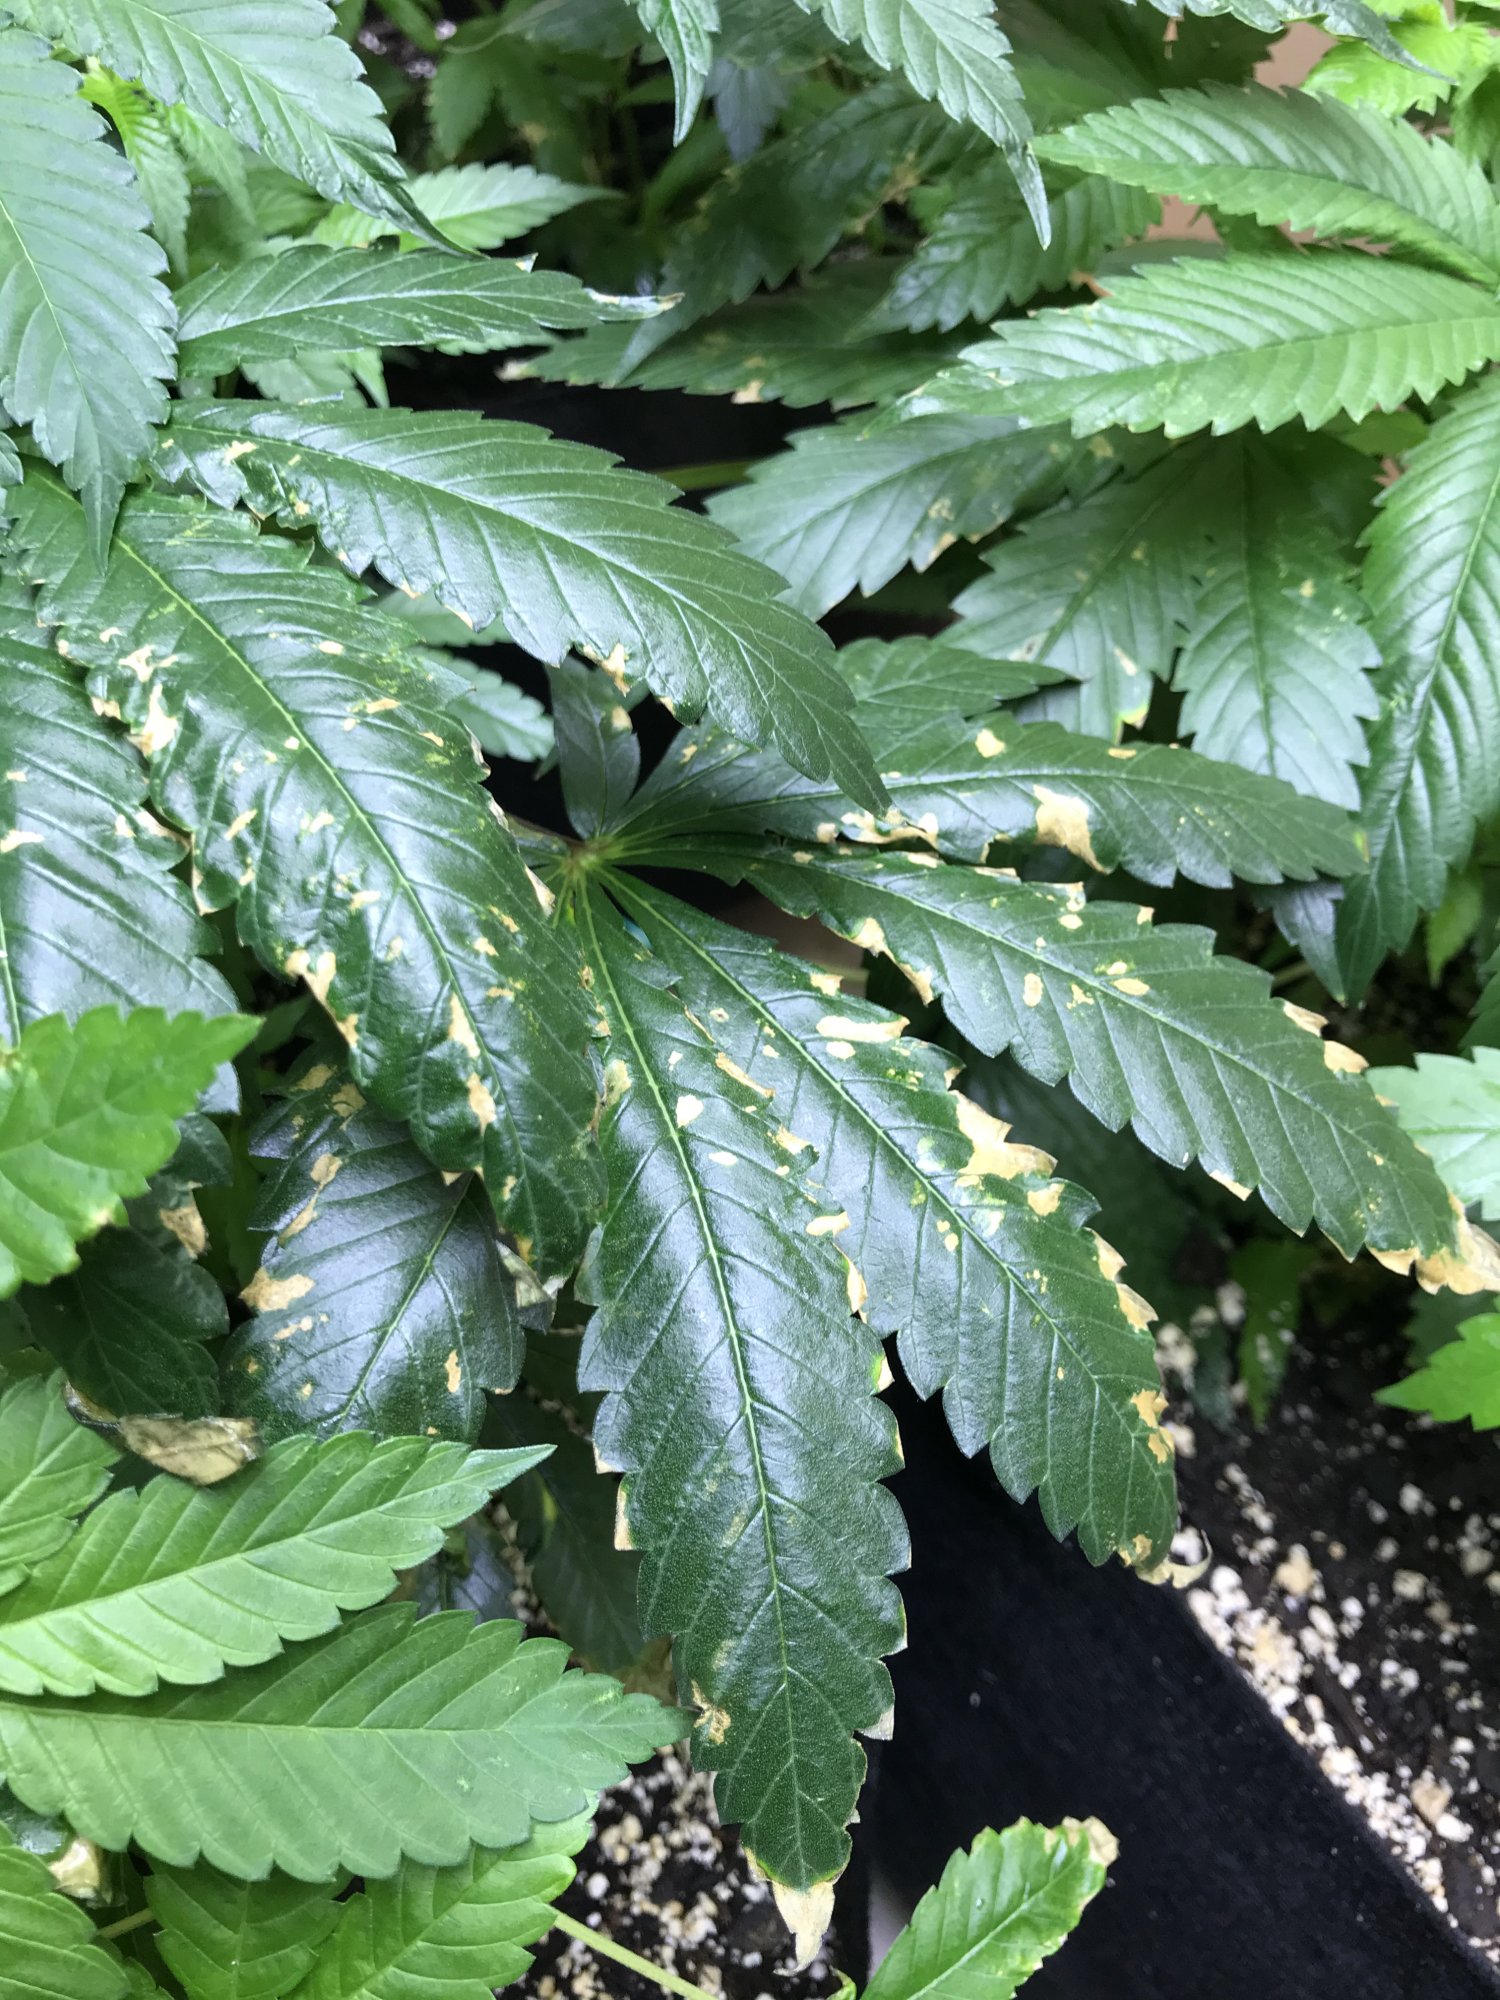 Leaves have sports need help